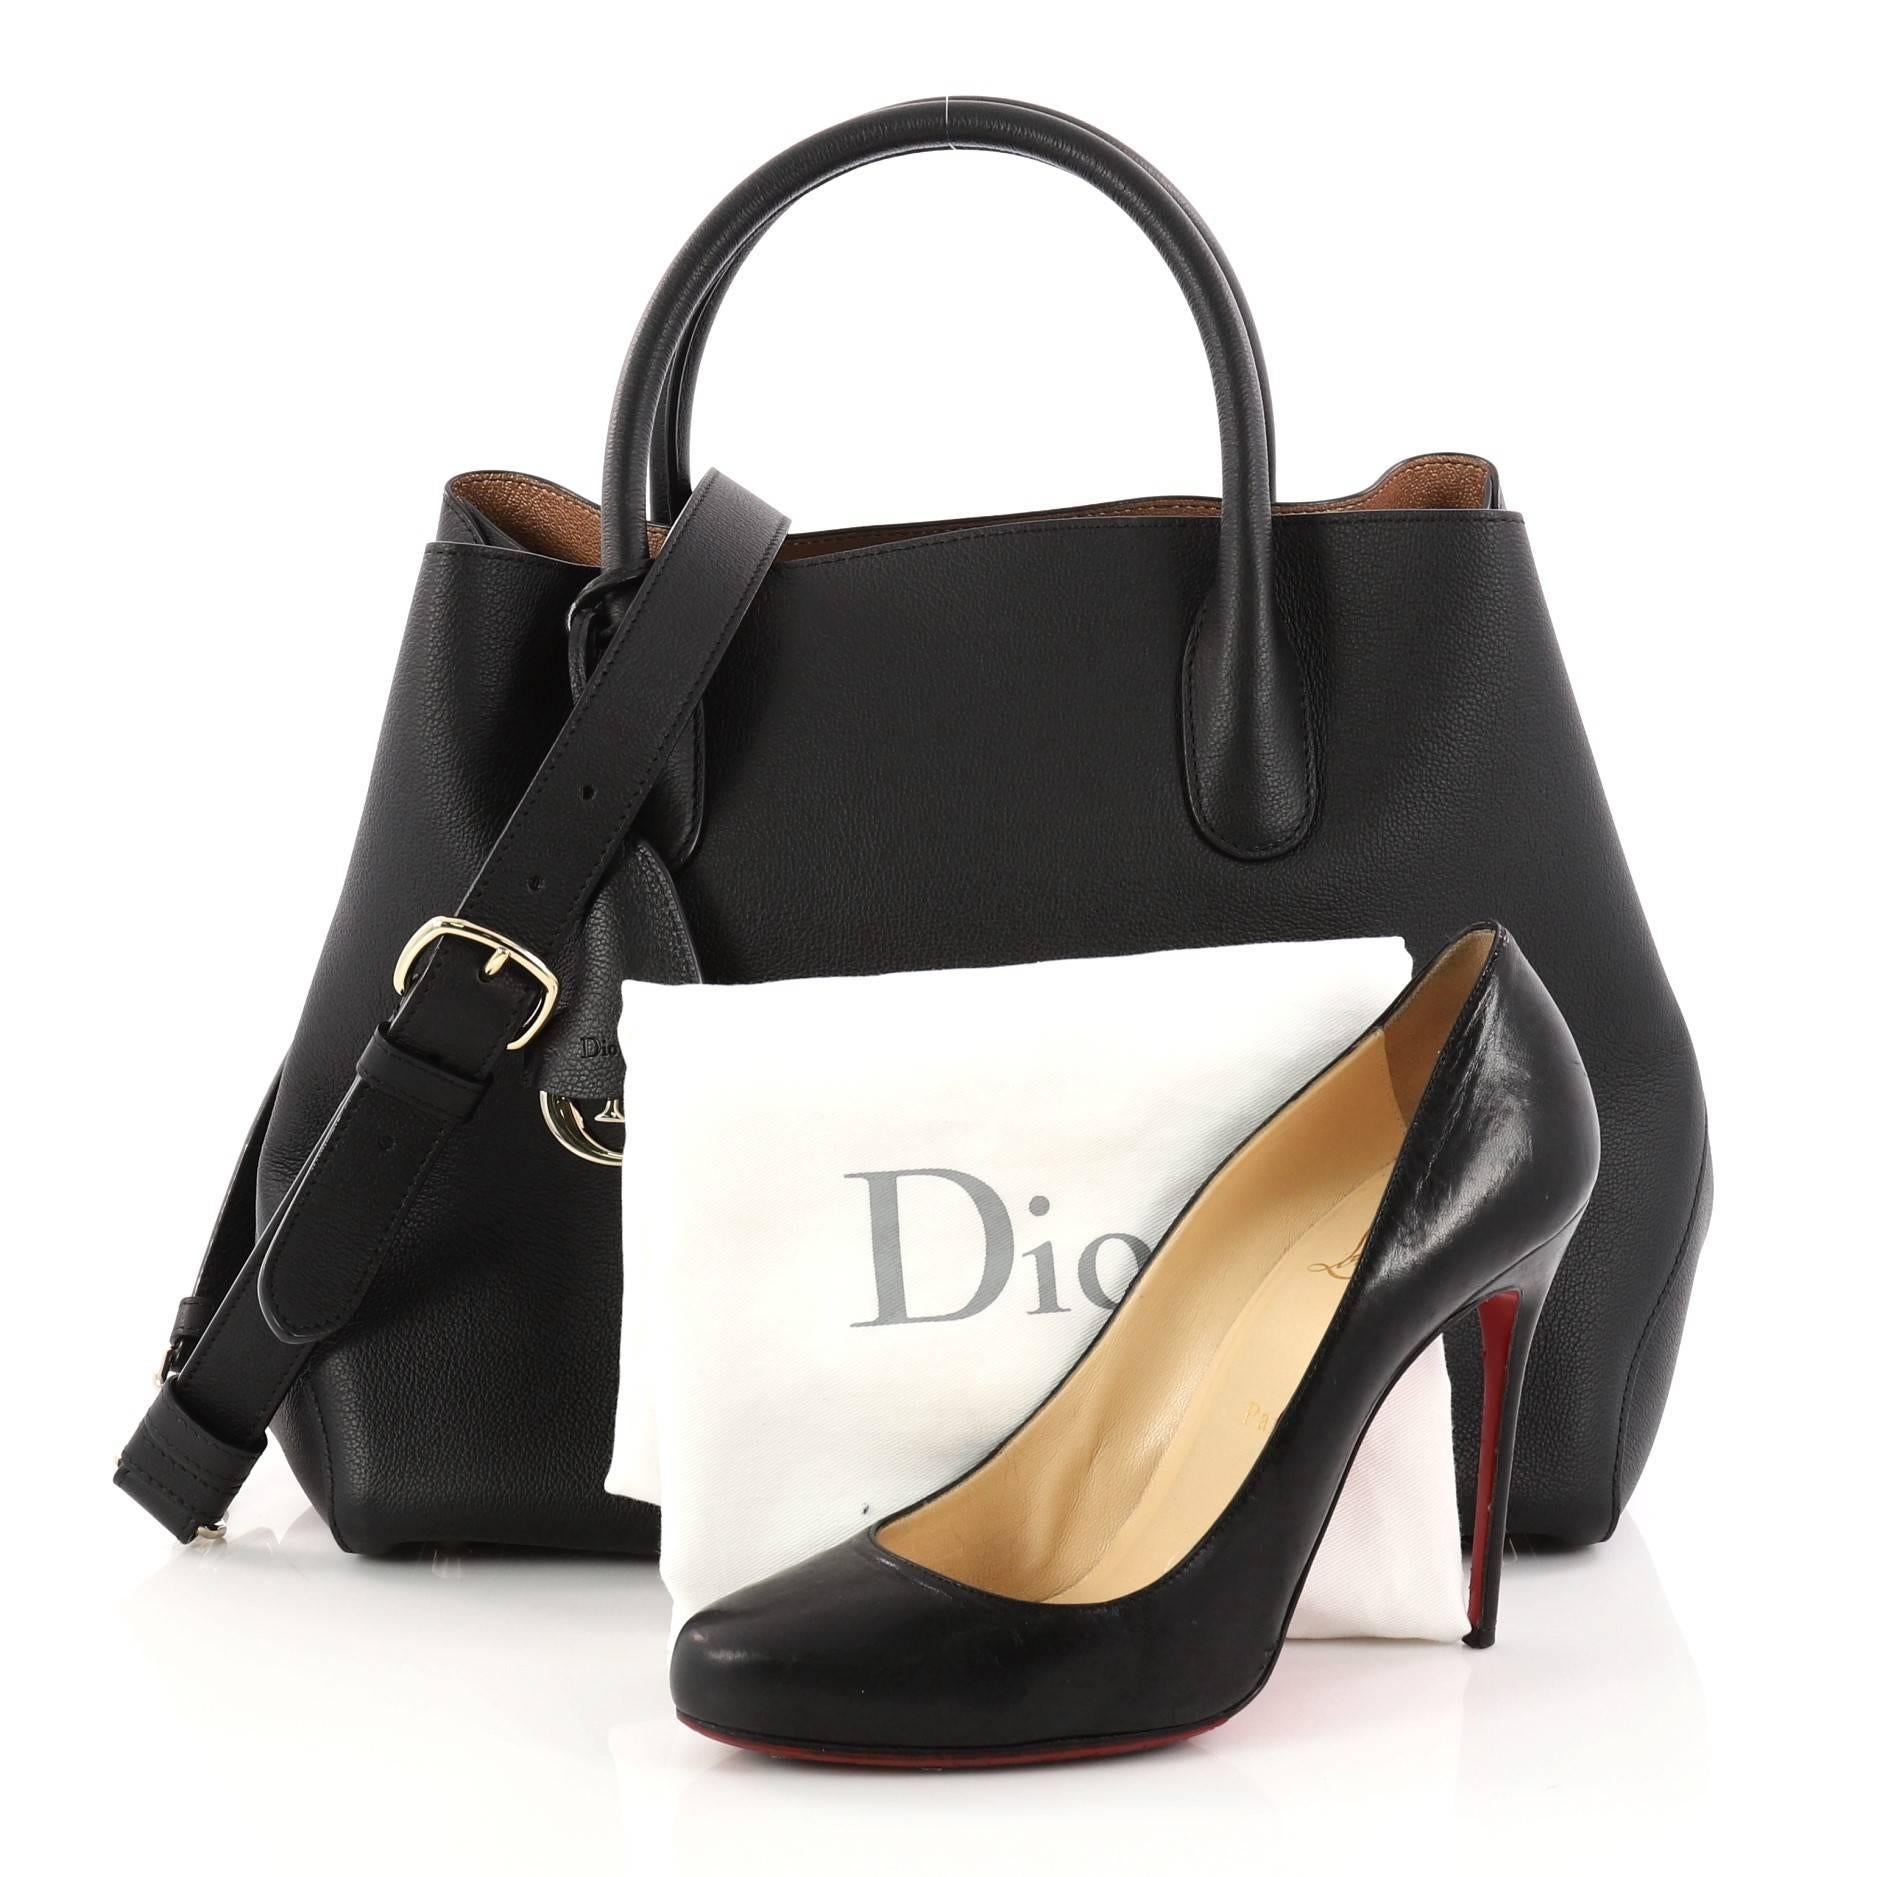 This authentic Christian Dior Open Bar Bag Leather Large takes inspiration from the brand's iconic Bar jacket. Crafted in beautiful black leather, this impeccably chic tote features a clean and soft-structured design, dual-rolled handles, protective